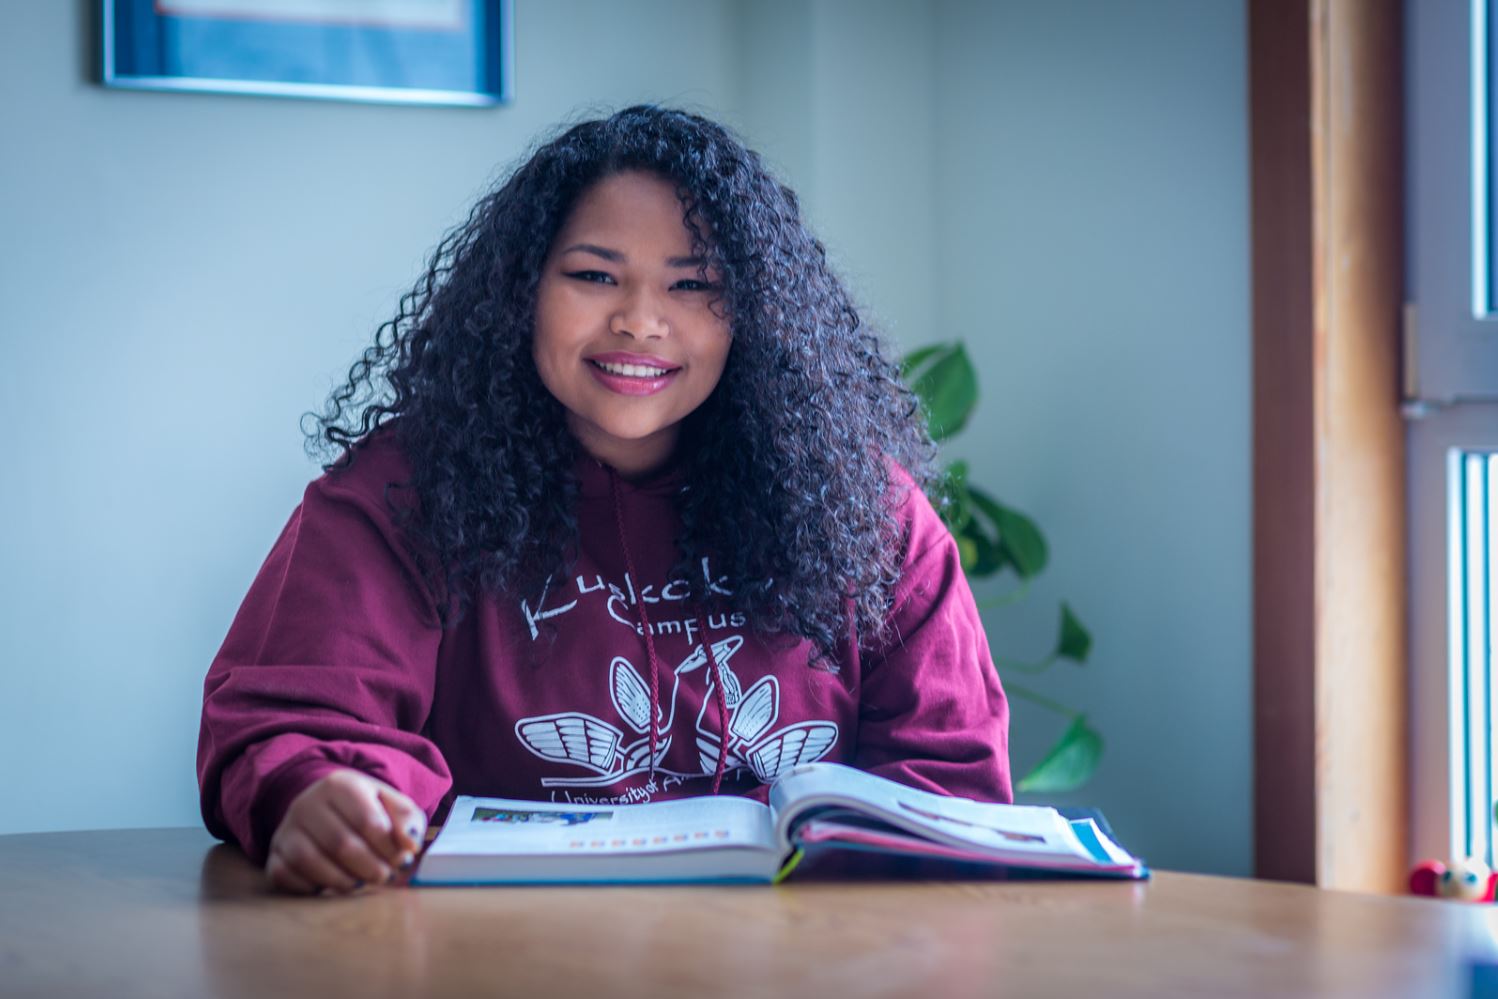 Kisha Lee, majoring in rural human services at UAF's Kuskoskim Campus in Bethel, studies in the student lounge on campus.